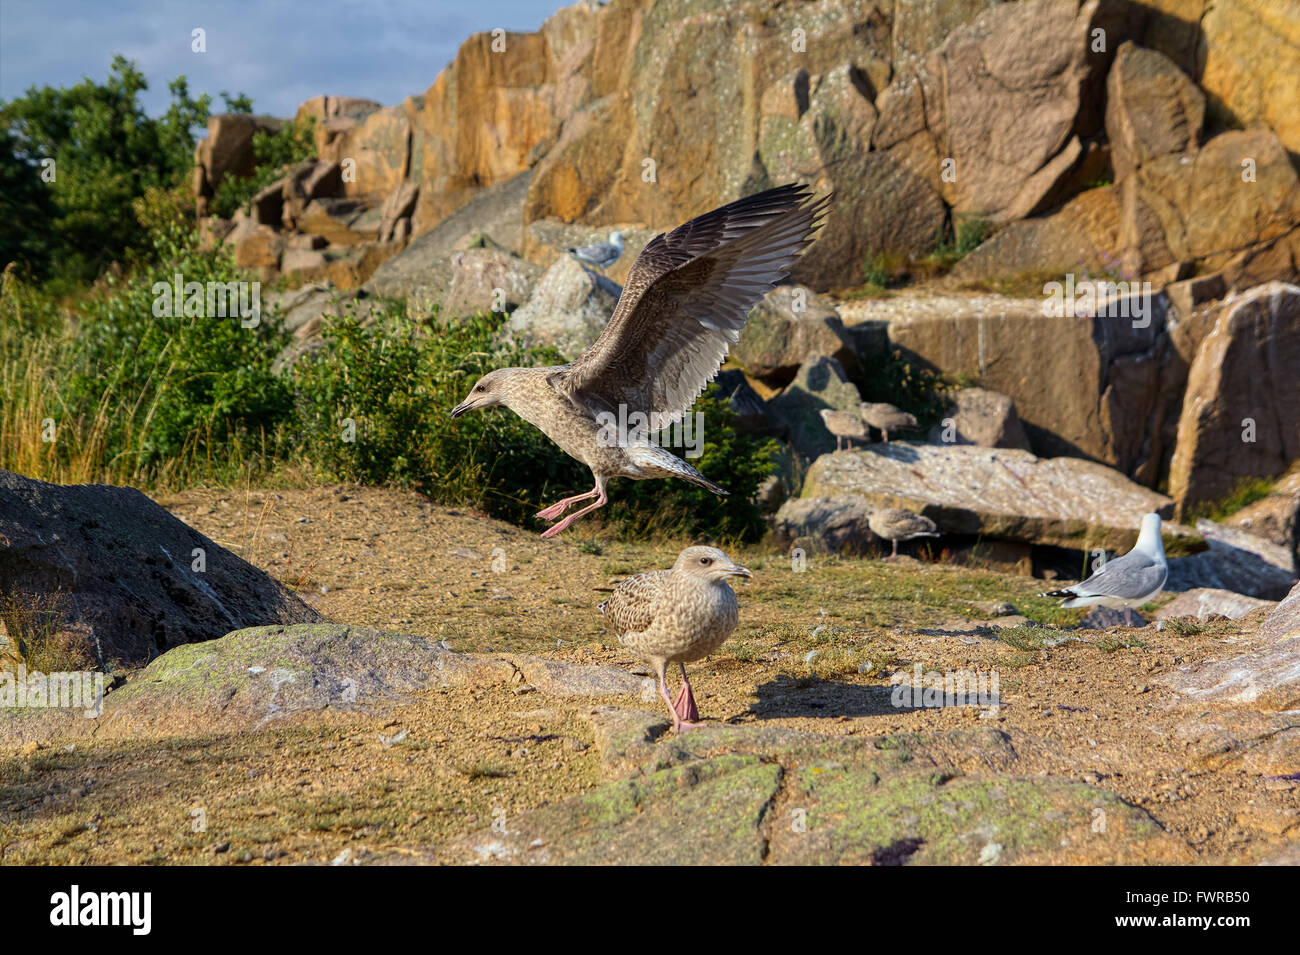 Young seagull landing in front of a colony of seagulls in the cliffs on Bornholm, Denmark Stock Photo